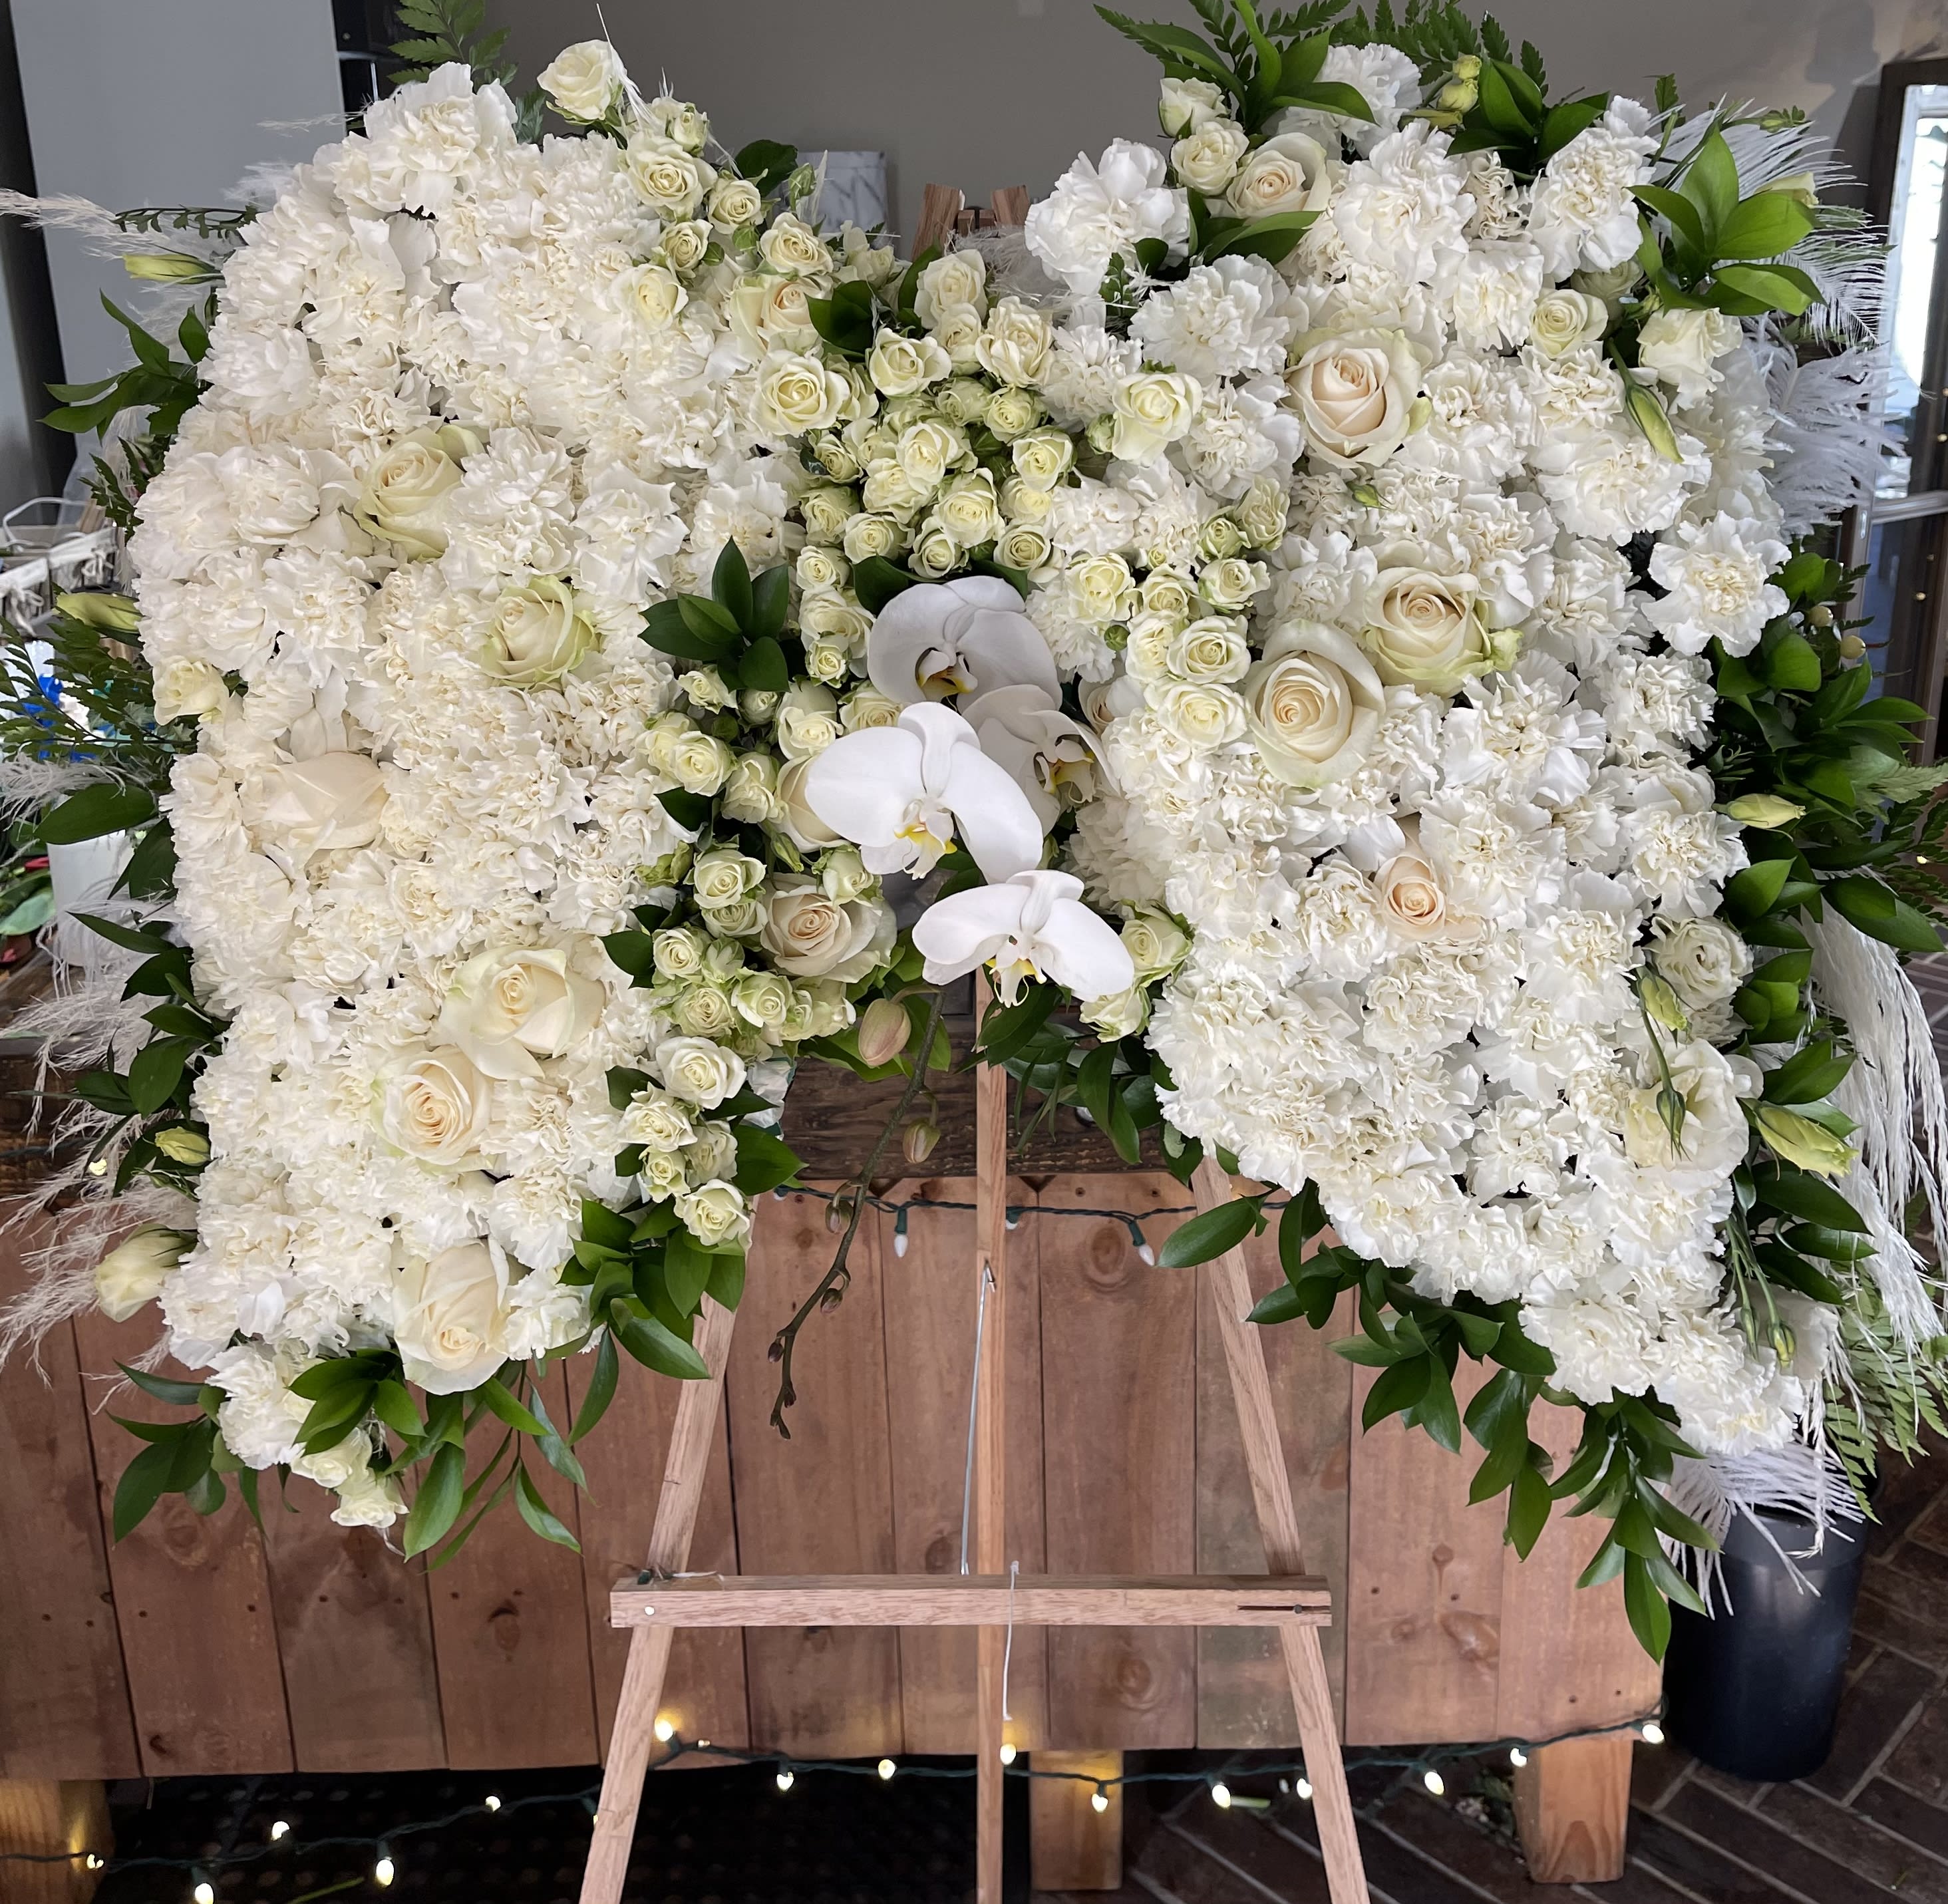 Flowers in Funeral Arrangements: Choosing the Right Blooms for a Meaningful  Tribute